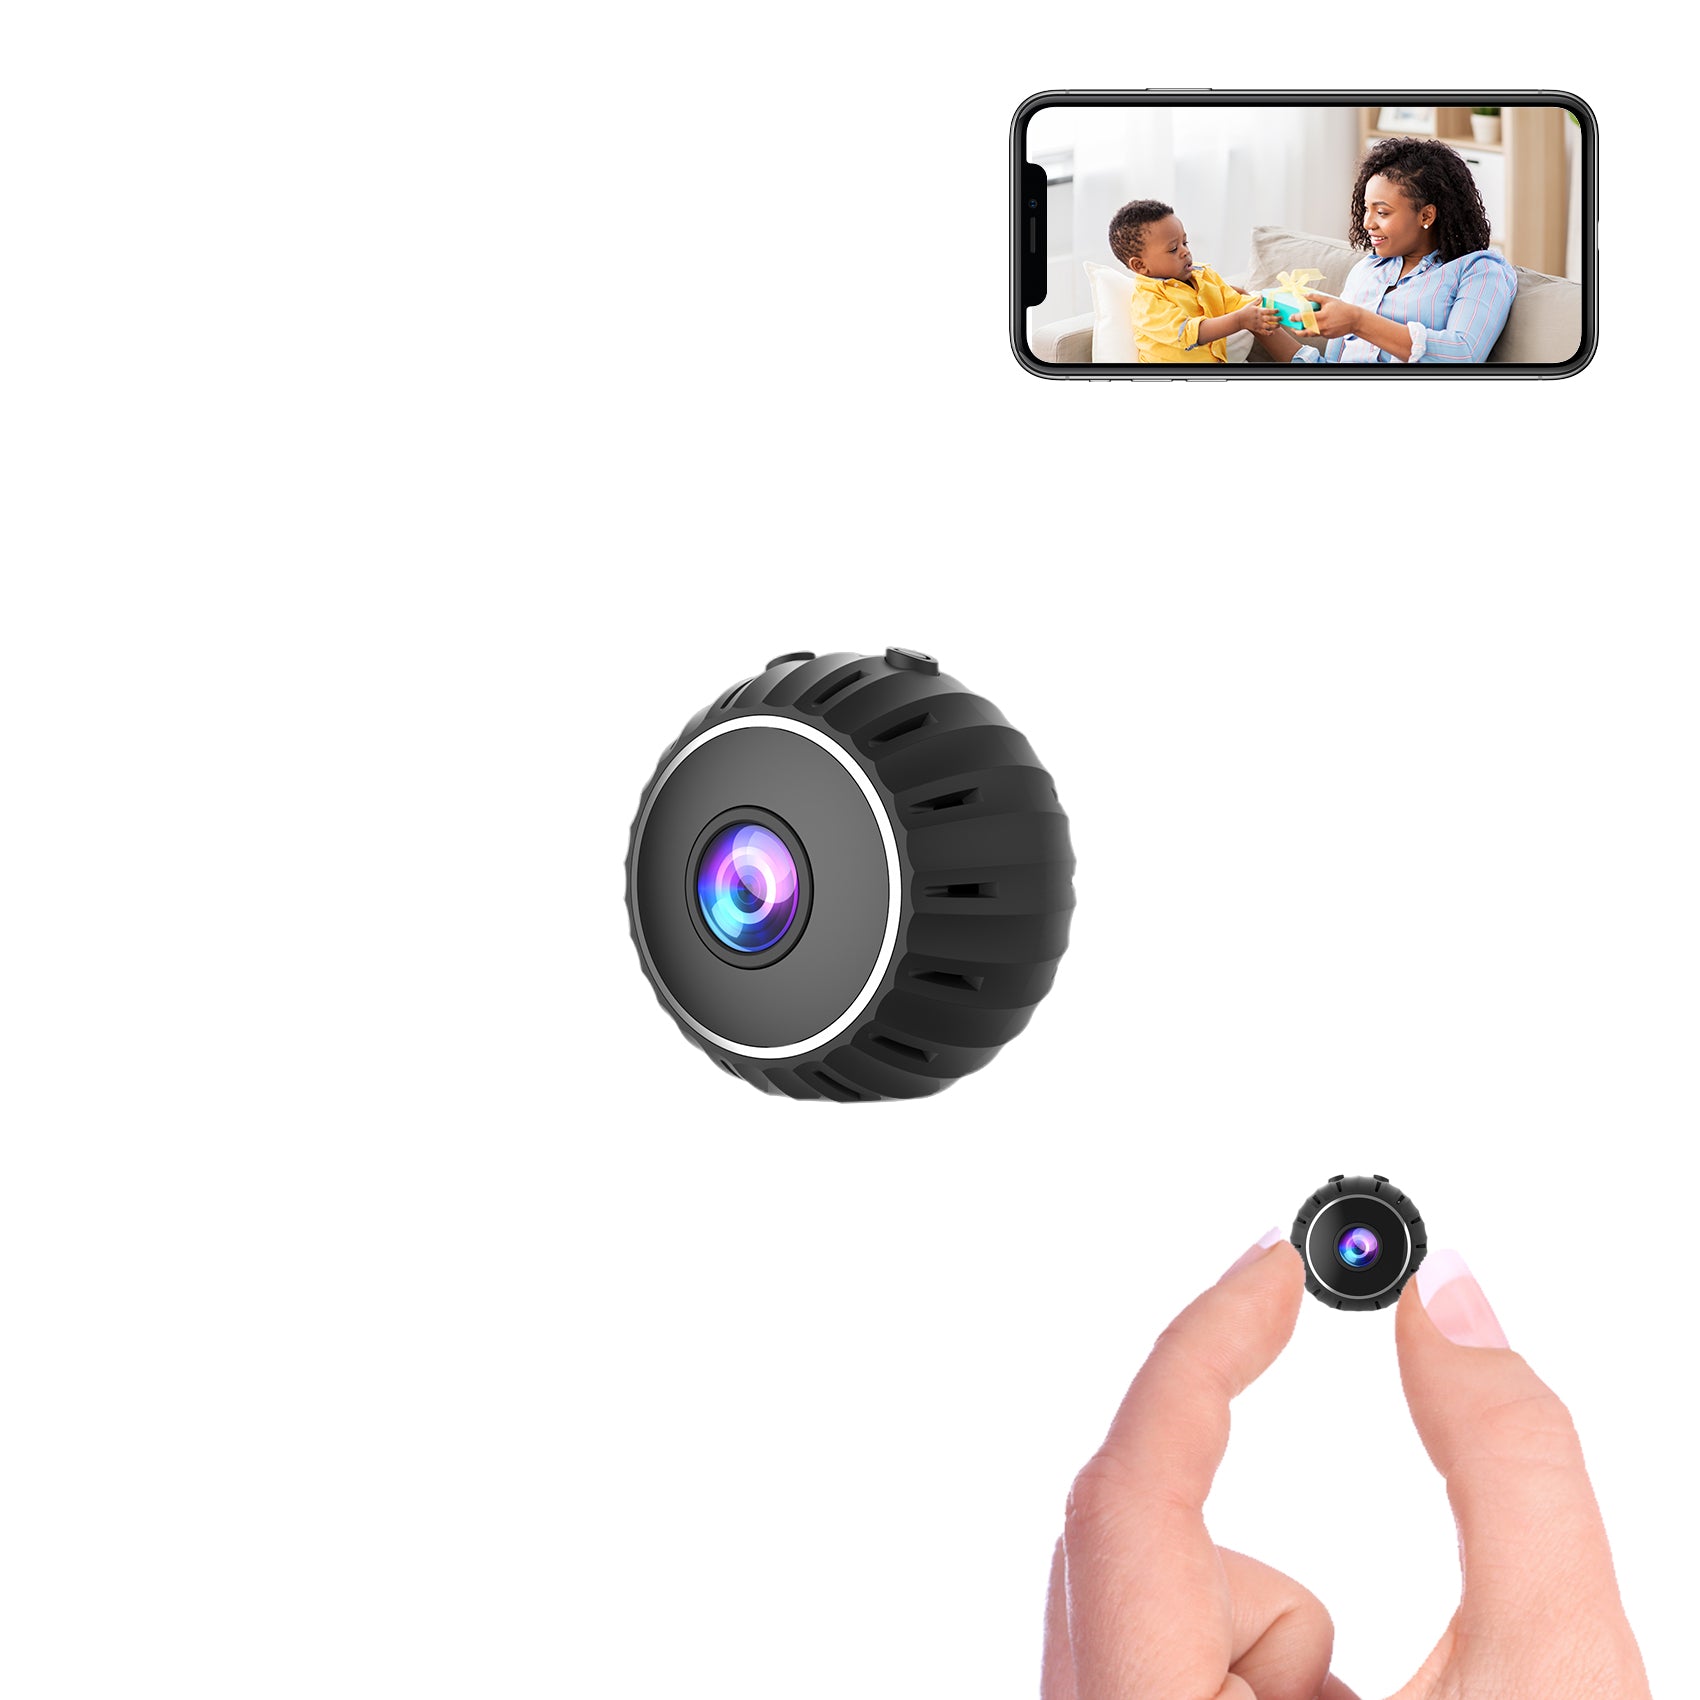  Mini Spy Camera 1080p - Wireless Hidden Nanny Cam with Night  Vision and Motion Detection - 2.4 GHz WiFi Hidden Camera for Indoor  Security with Video and Audio Recorder- Battery